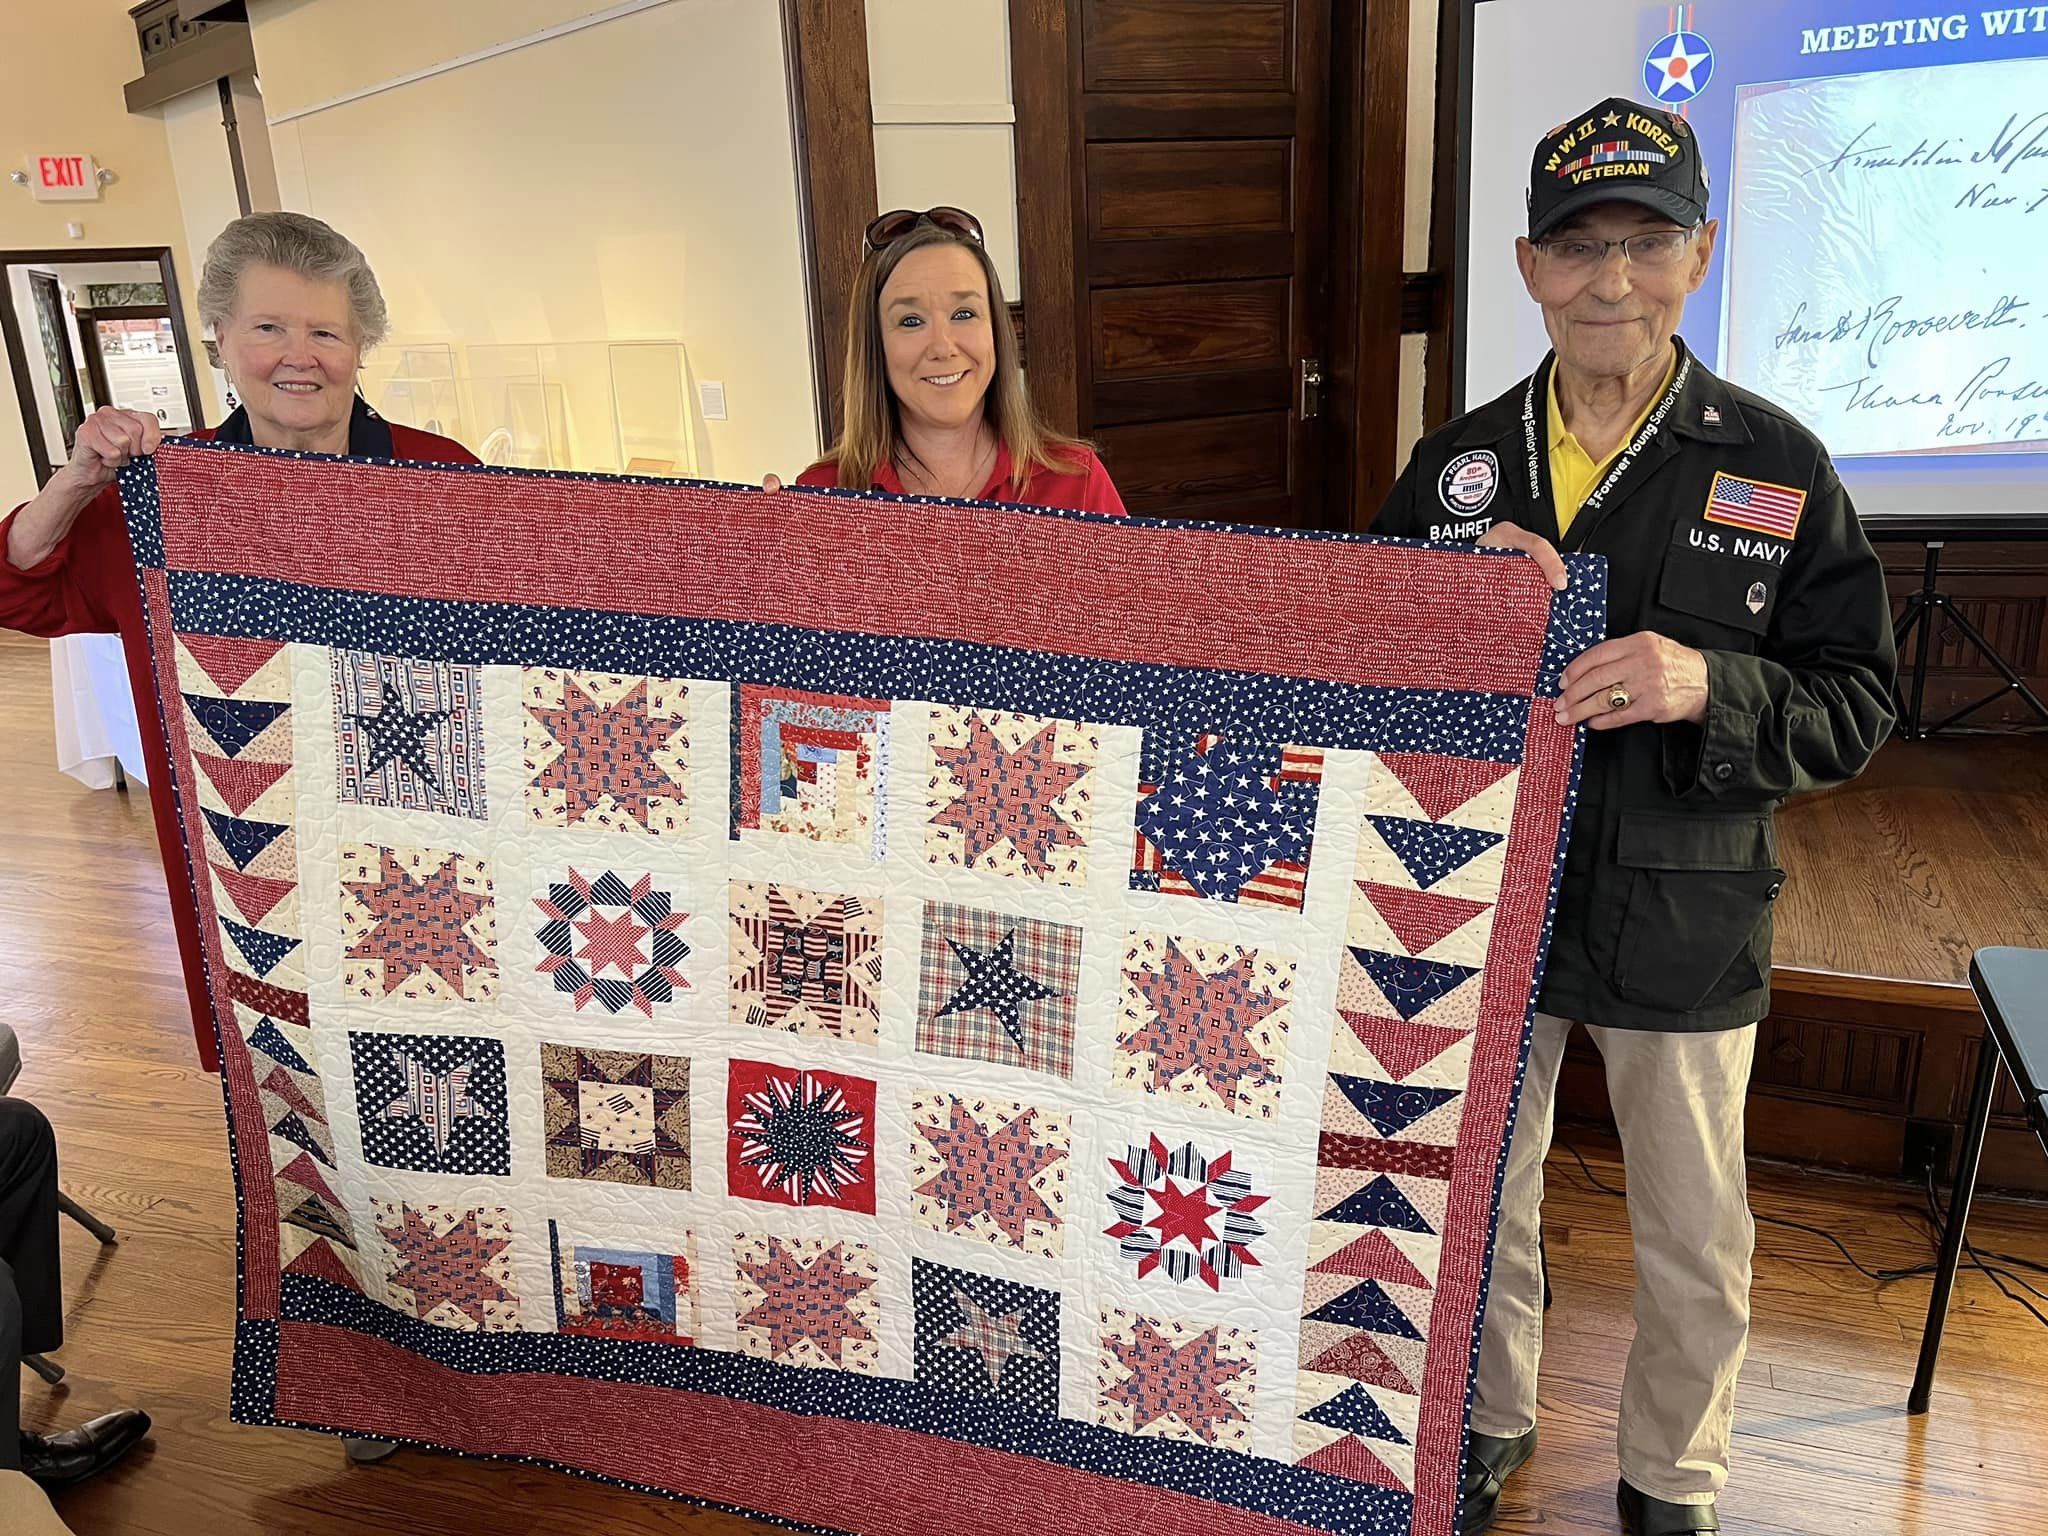 Quilts of Valor 2023 Kick-off! Join us in honoring service men and women touched by war.